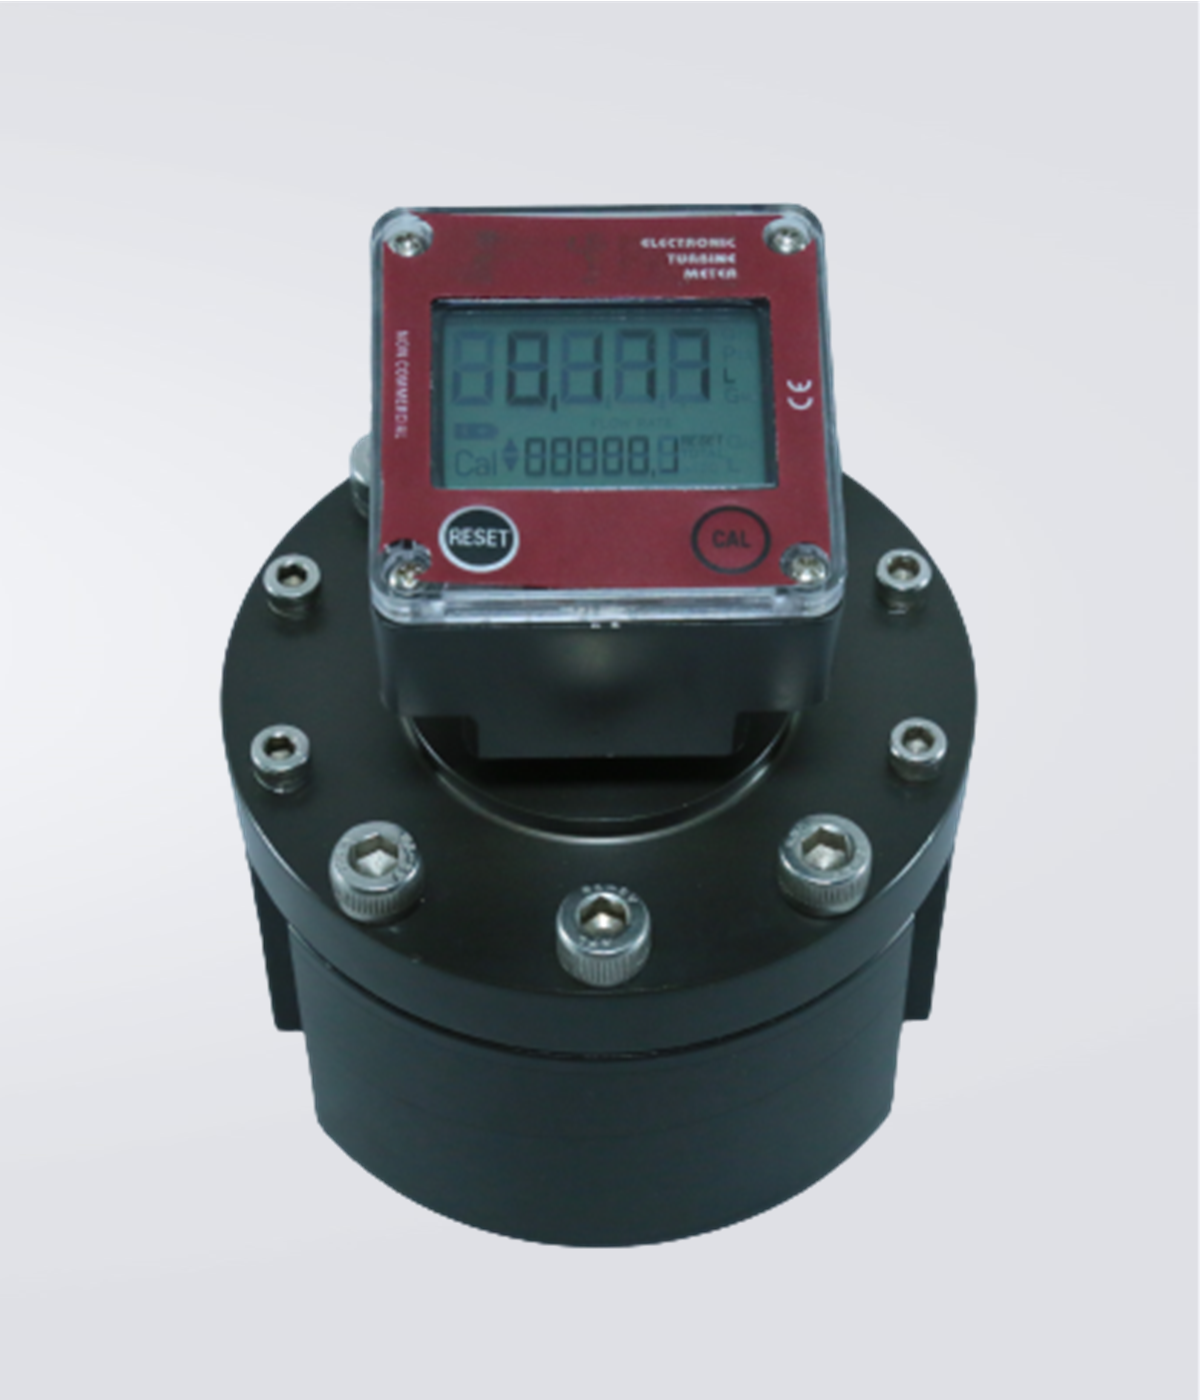 Oval Gear Flow Sensor with Battery operated Display